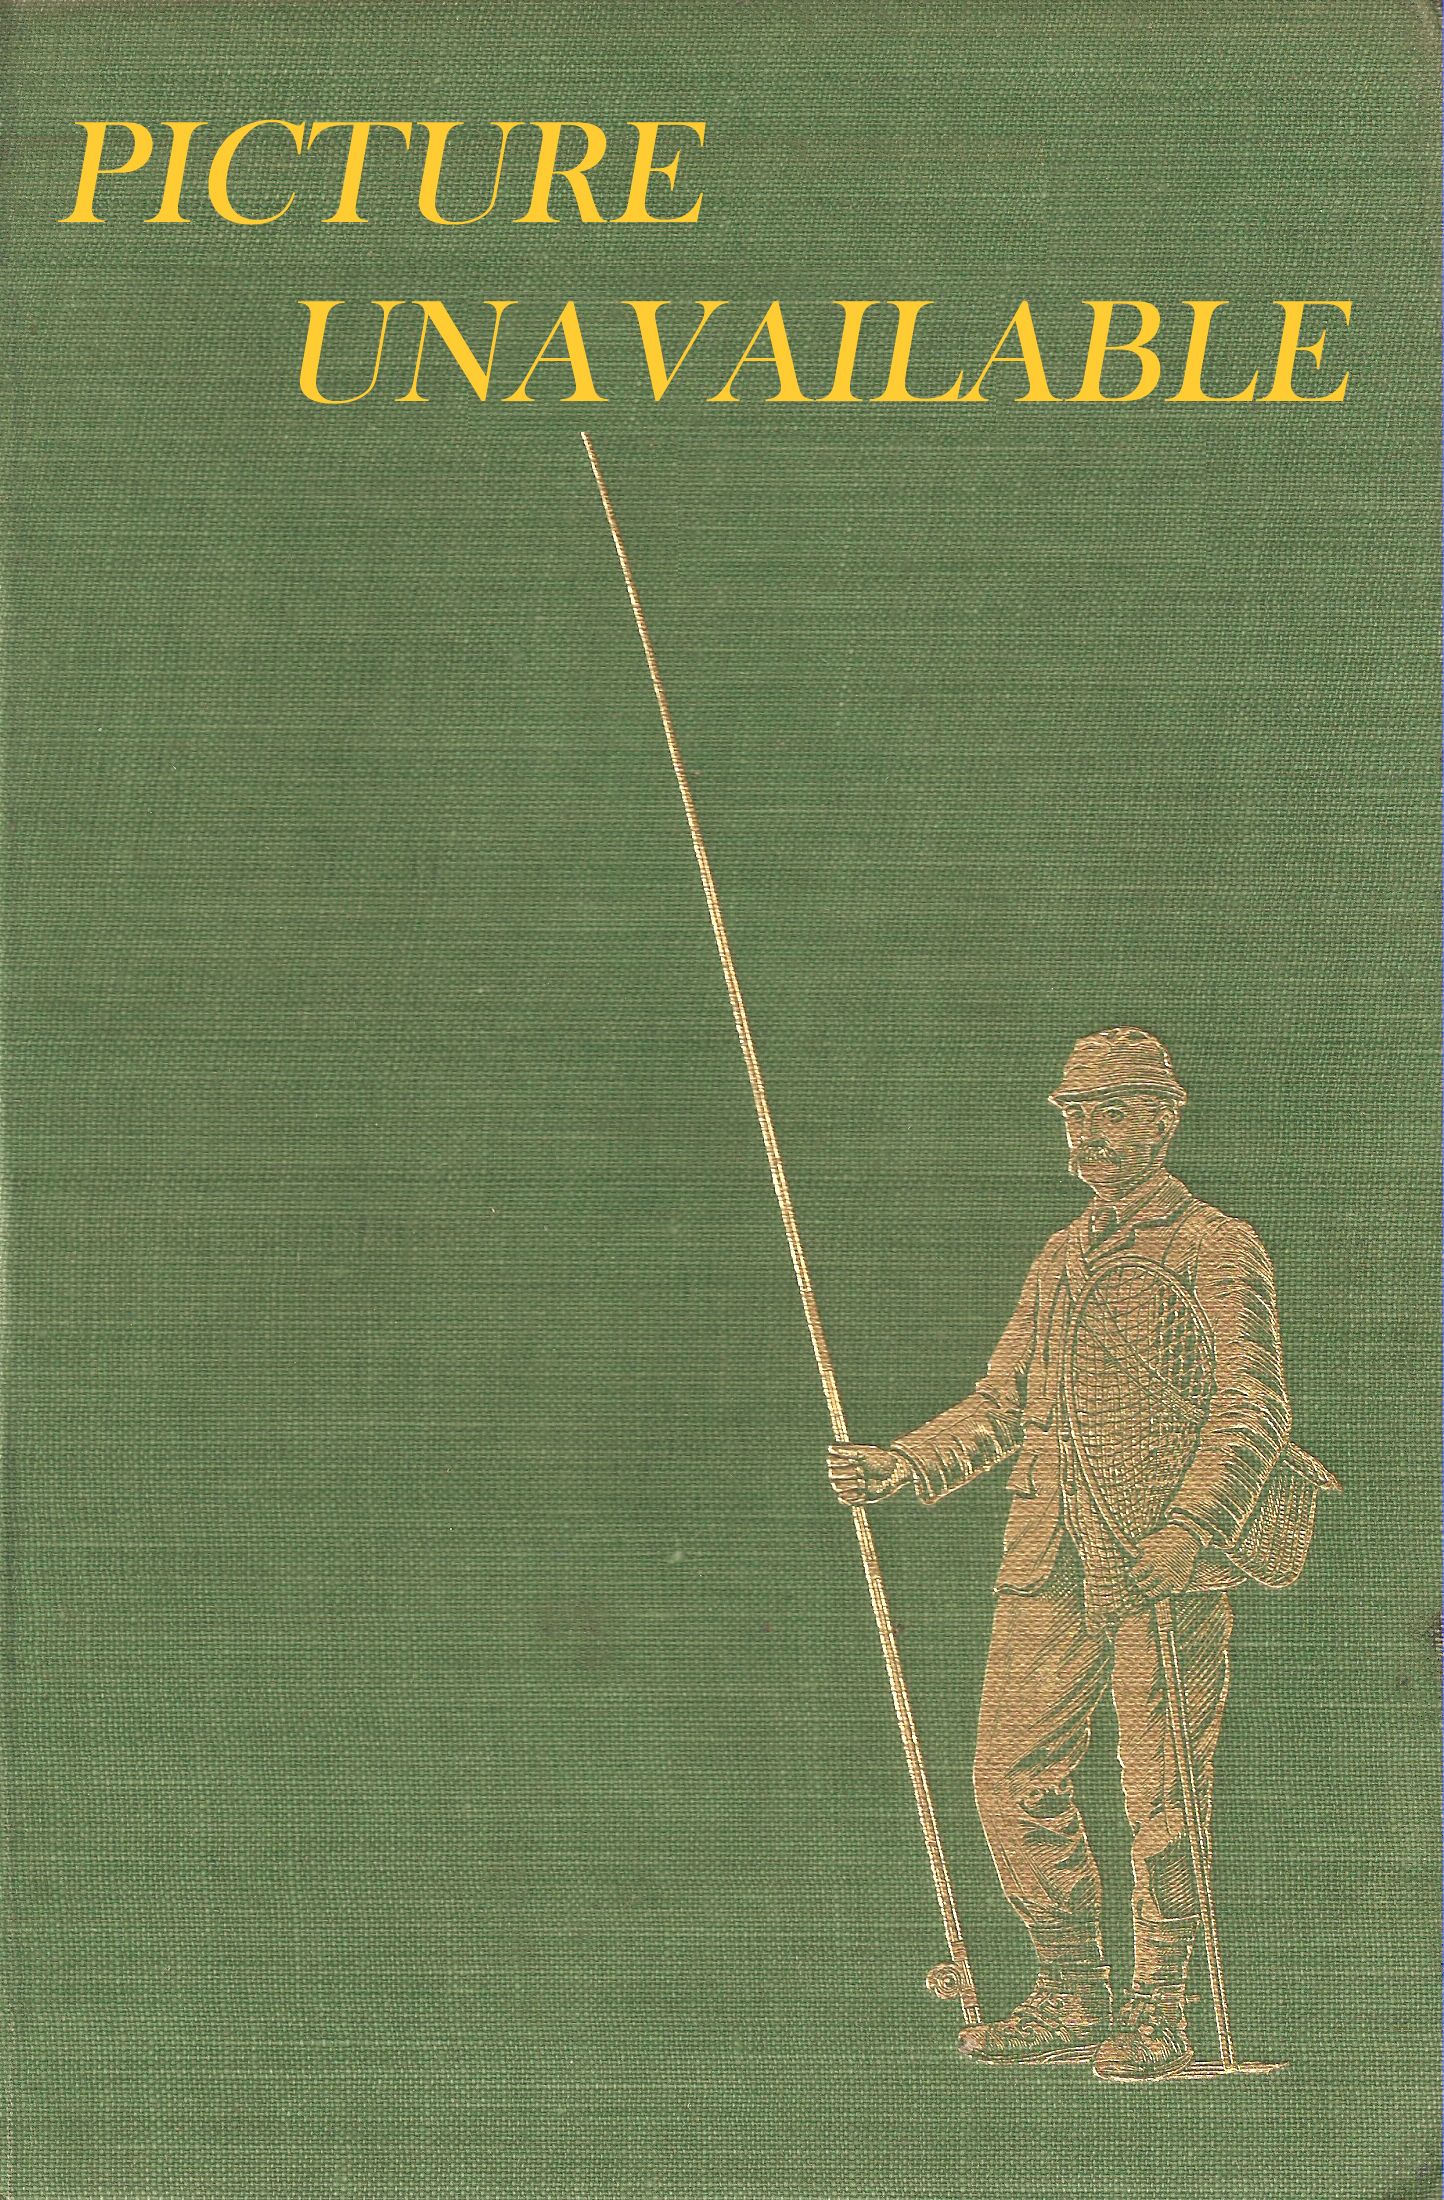 NORTHUMBRIAN ANGLERS' FEDERATION. HANDBOOK AND GUIDE TO NORTH COUNTRY  ANGLING 1957. Compiled by Capt. Chas. C. Duncan, Mr. J.L. Hardy and Mr. E.  Lister on behalf of the Committee.